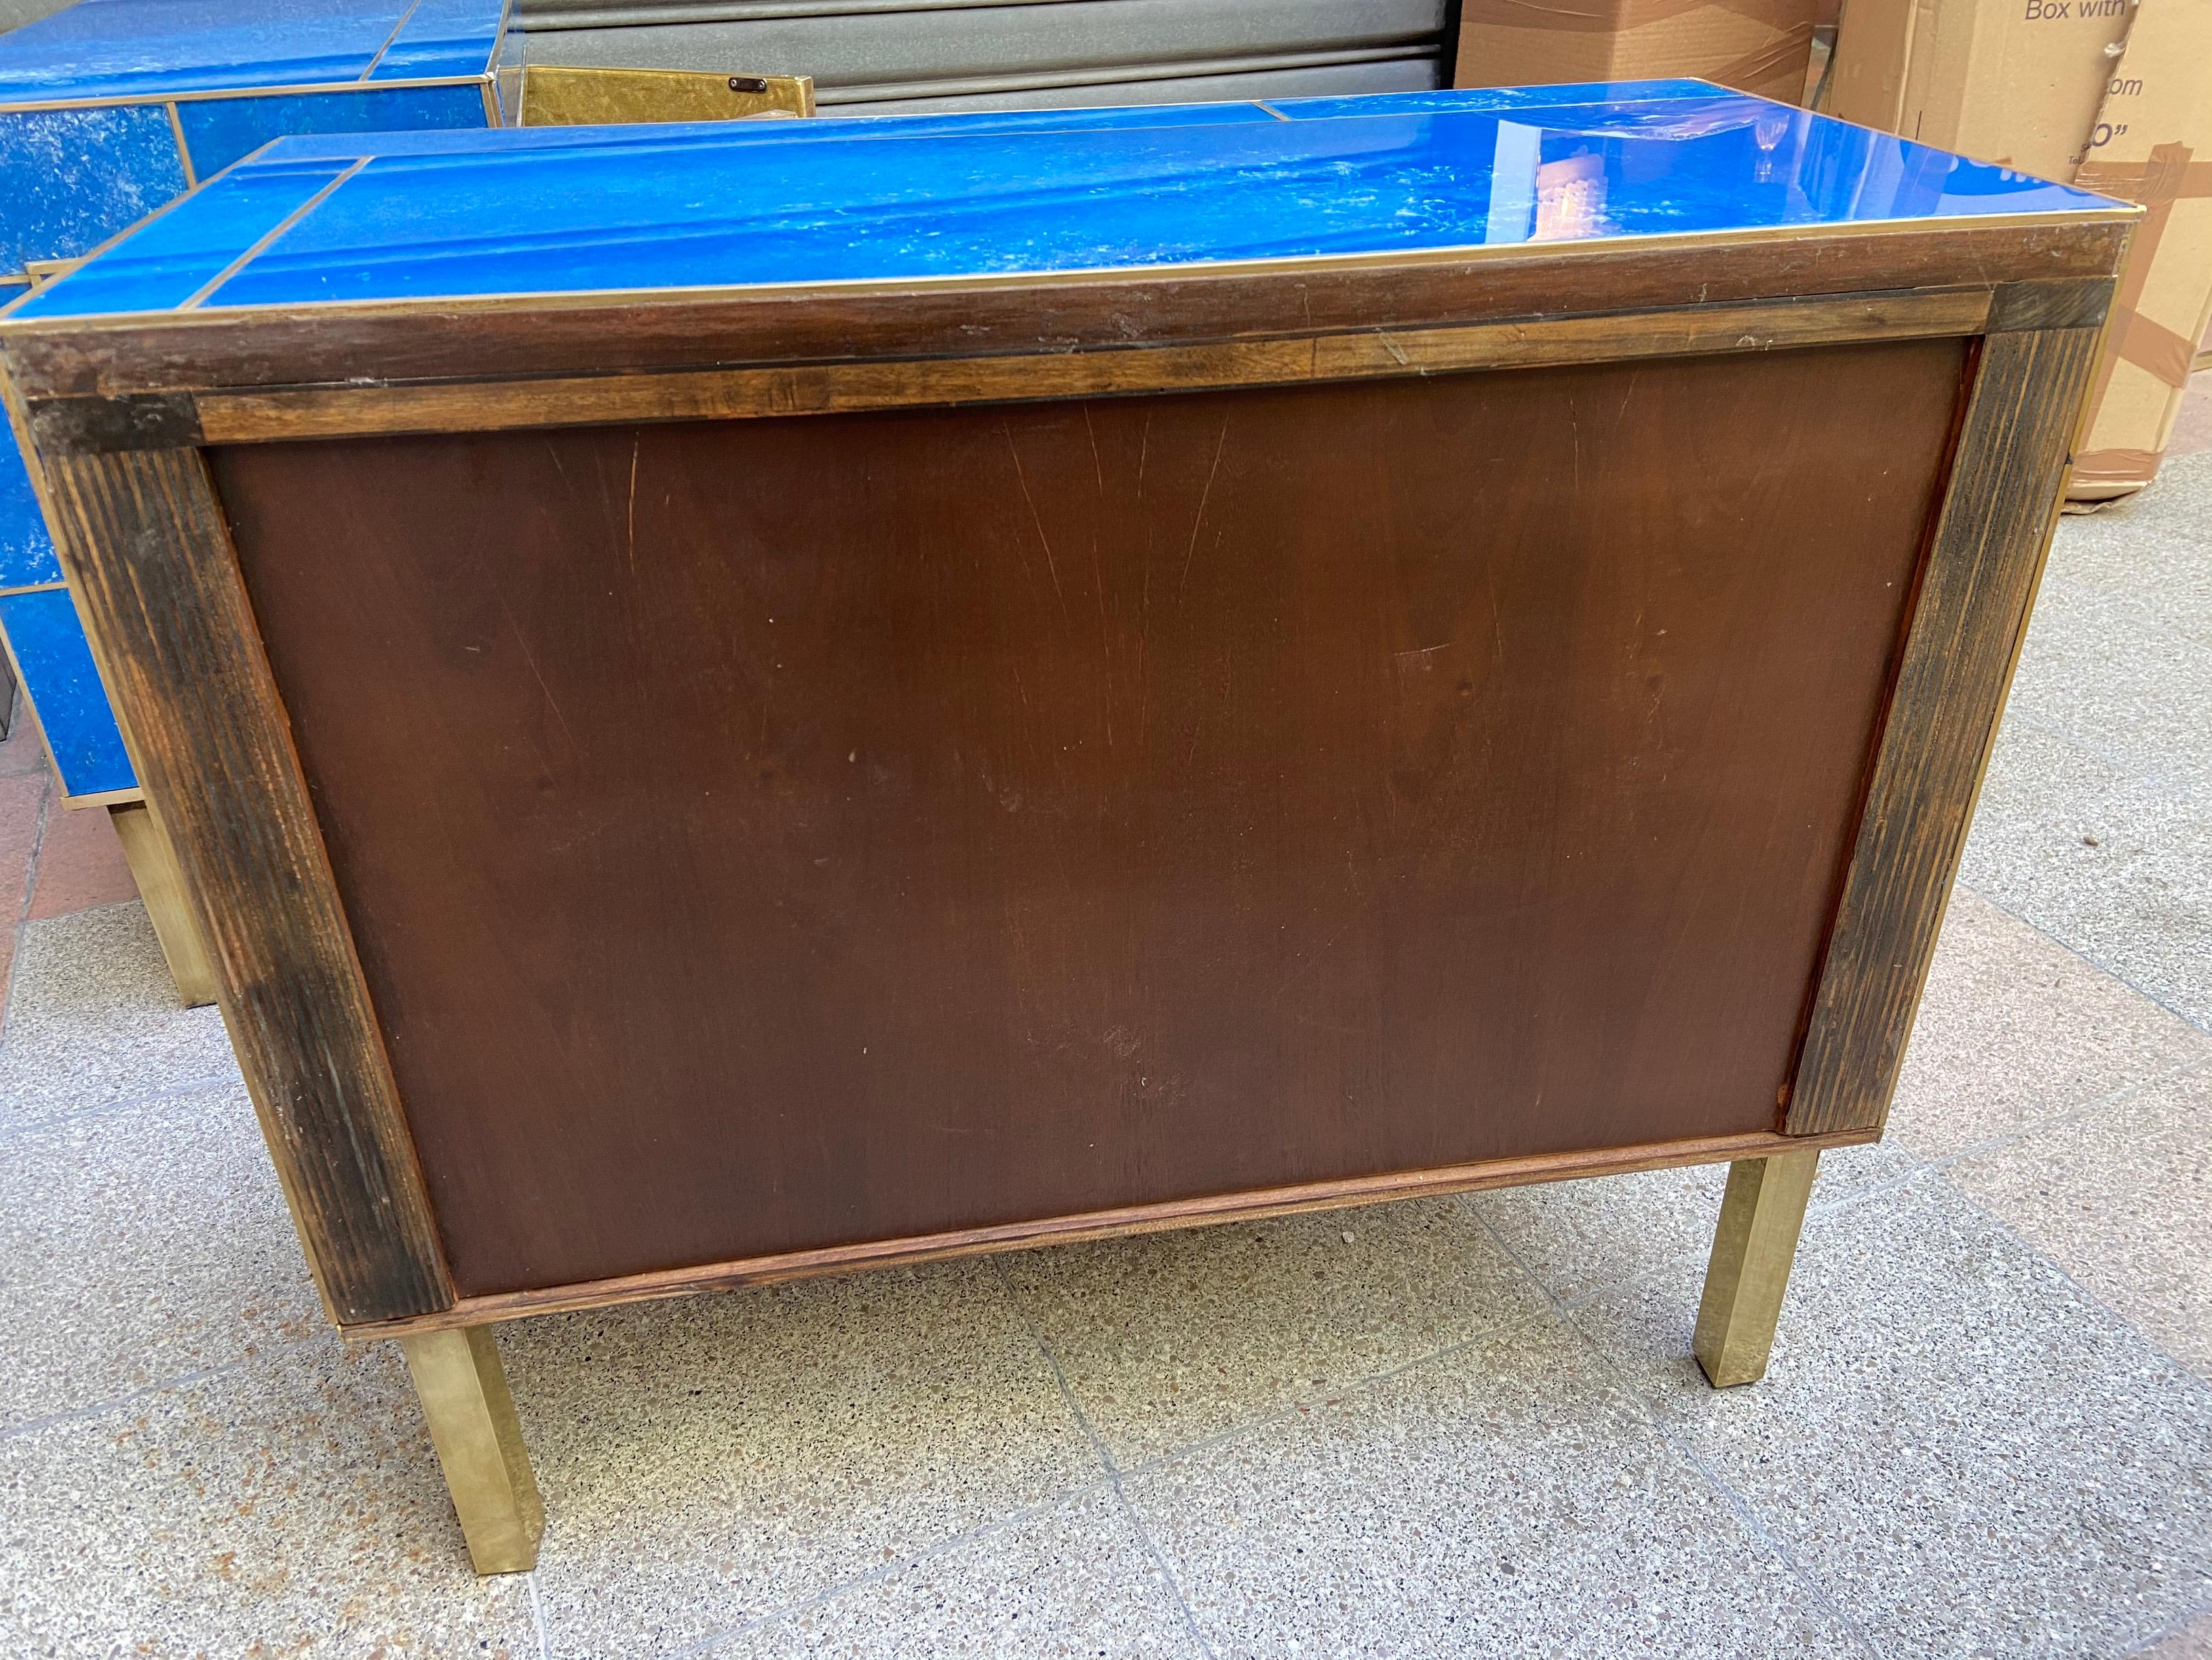 Pair of small sideboards / nightstands 2 doors

Blue tinted glass and brass

Italy

L76,5xP39xH66 cm 

Circa 1970